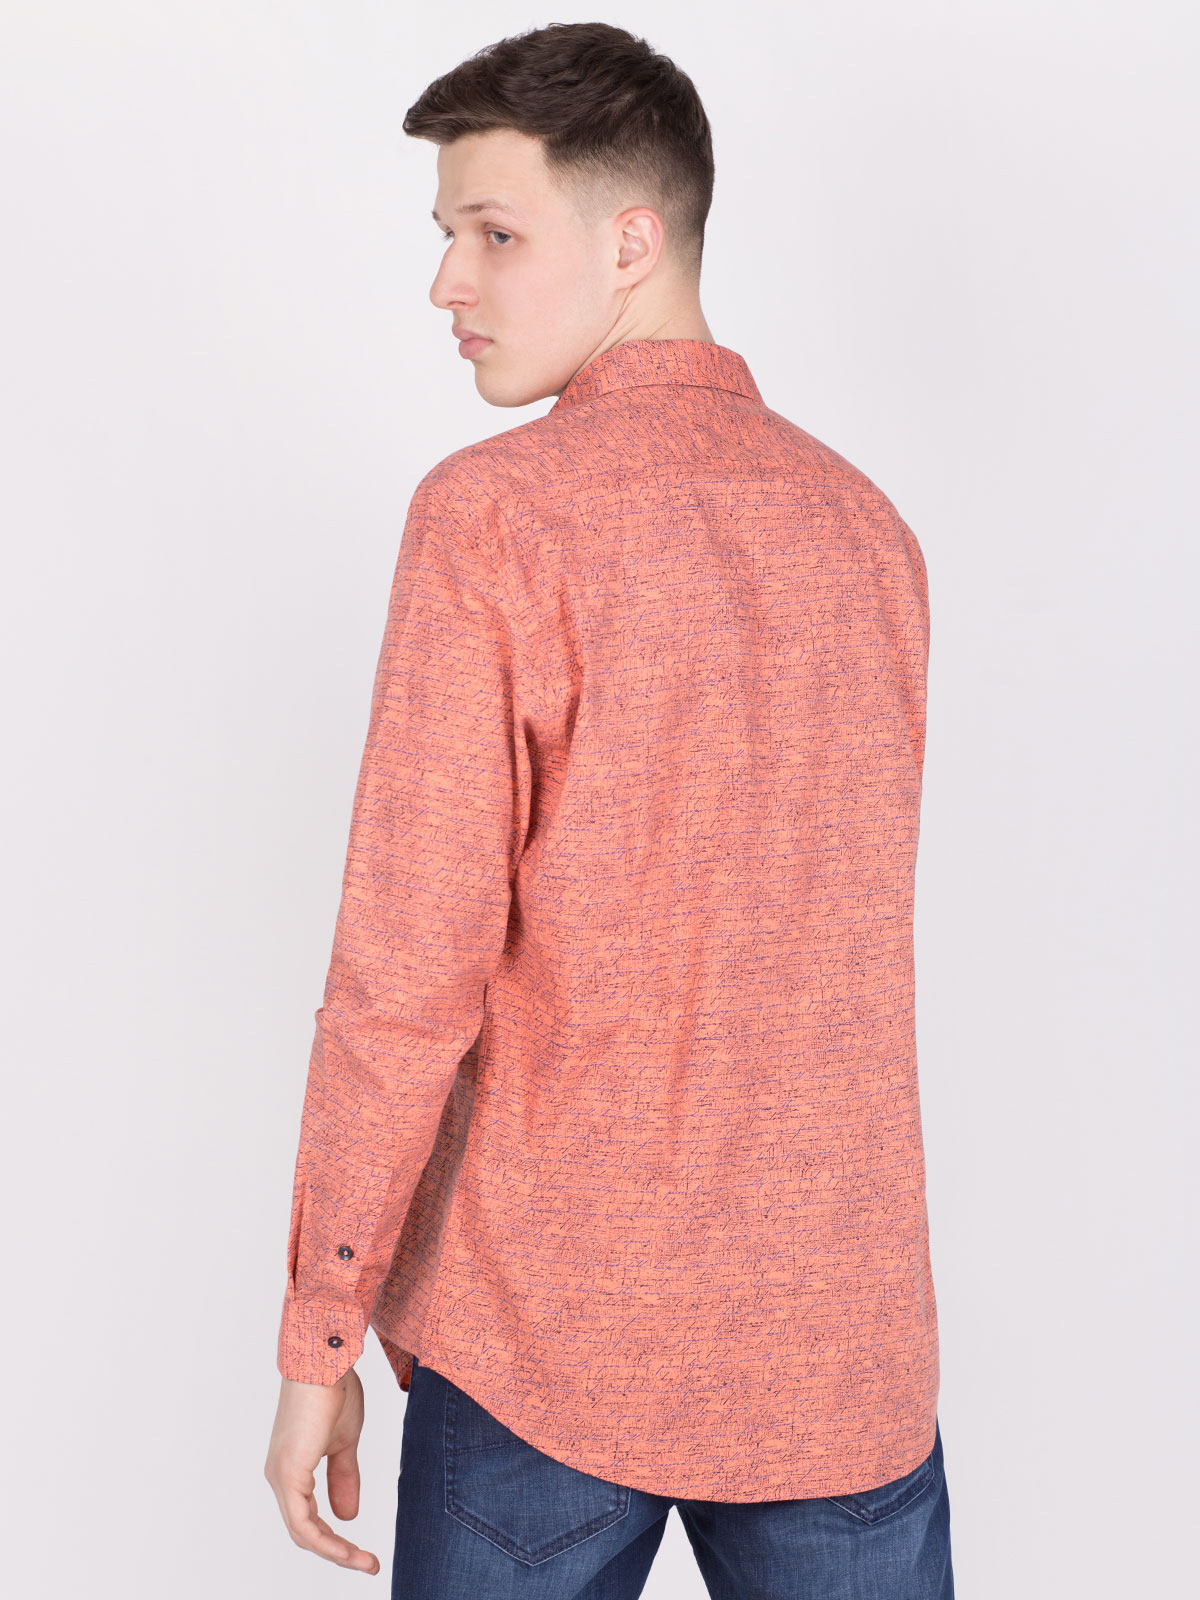 Shirt in orange with spectacular print - 21466 € 21.93 img4